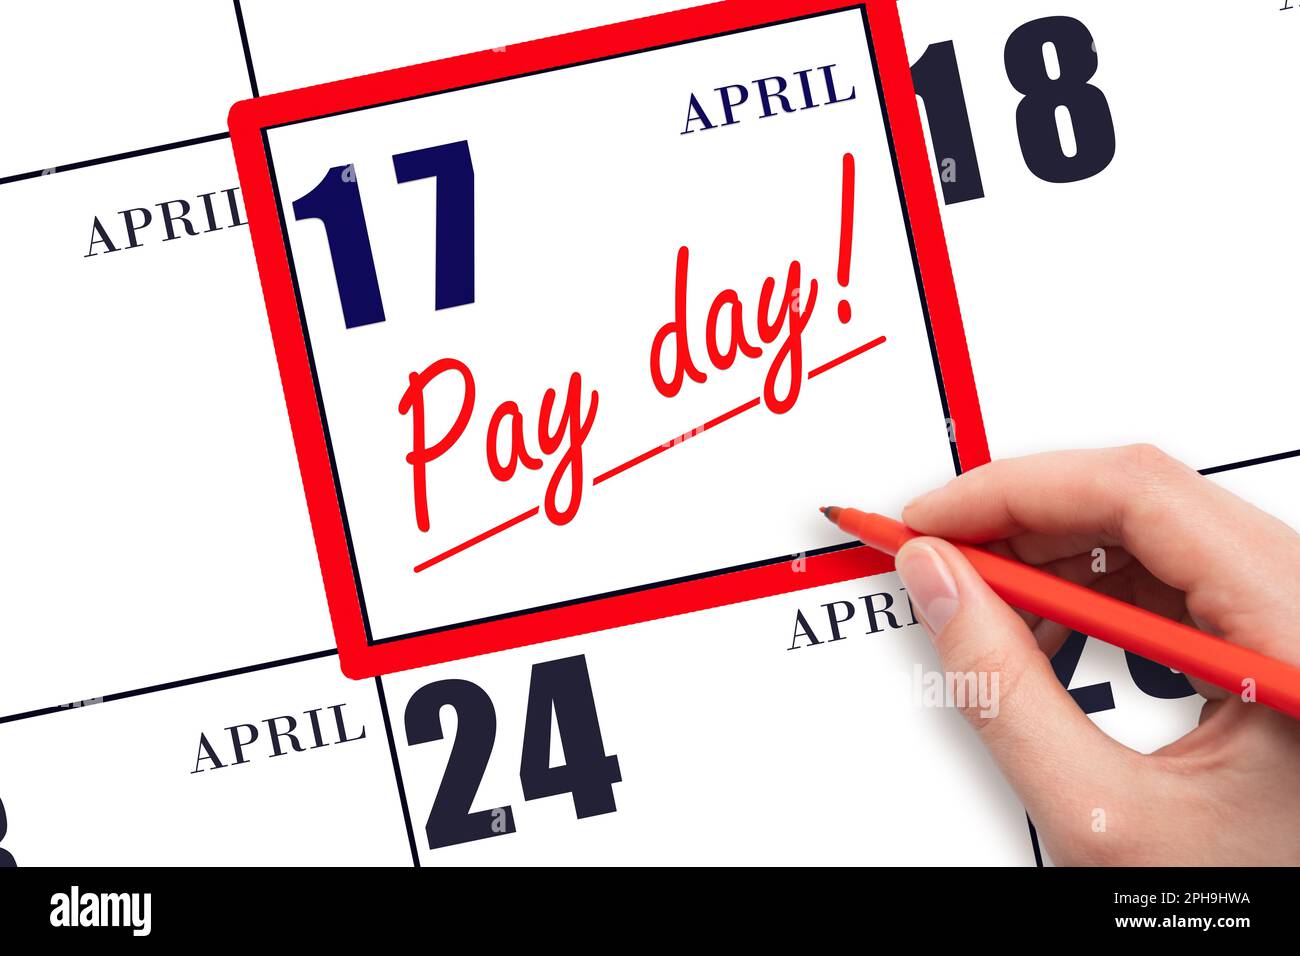 17th day of April. Hand writing text PAY DATE on calendar date April 17 and underline it. Payment due date. Reminder concept of payment. Spring month, Stock Photo